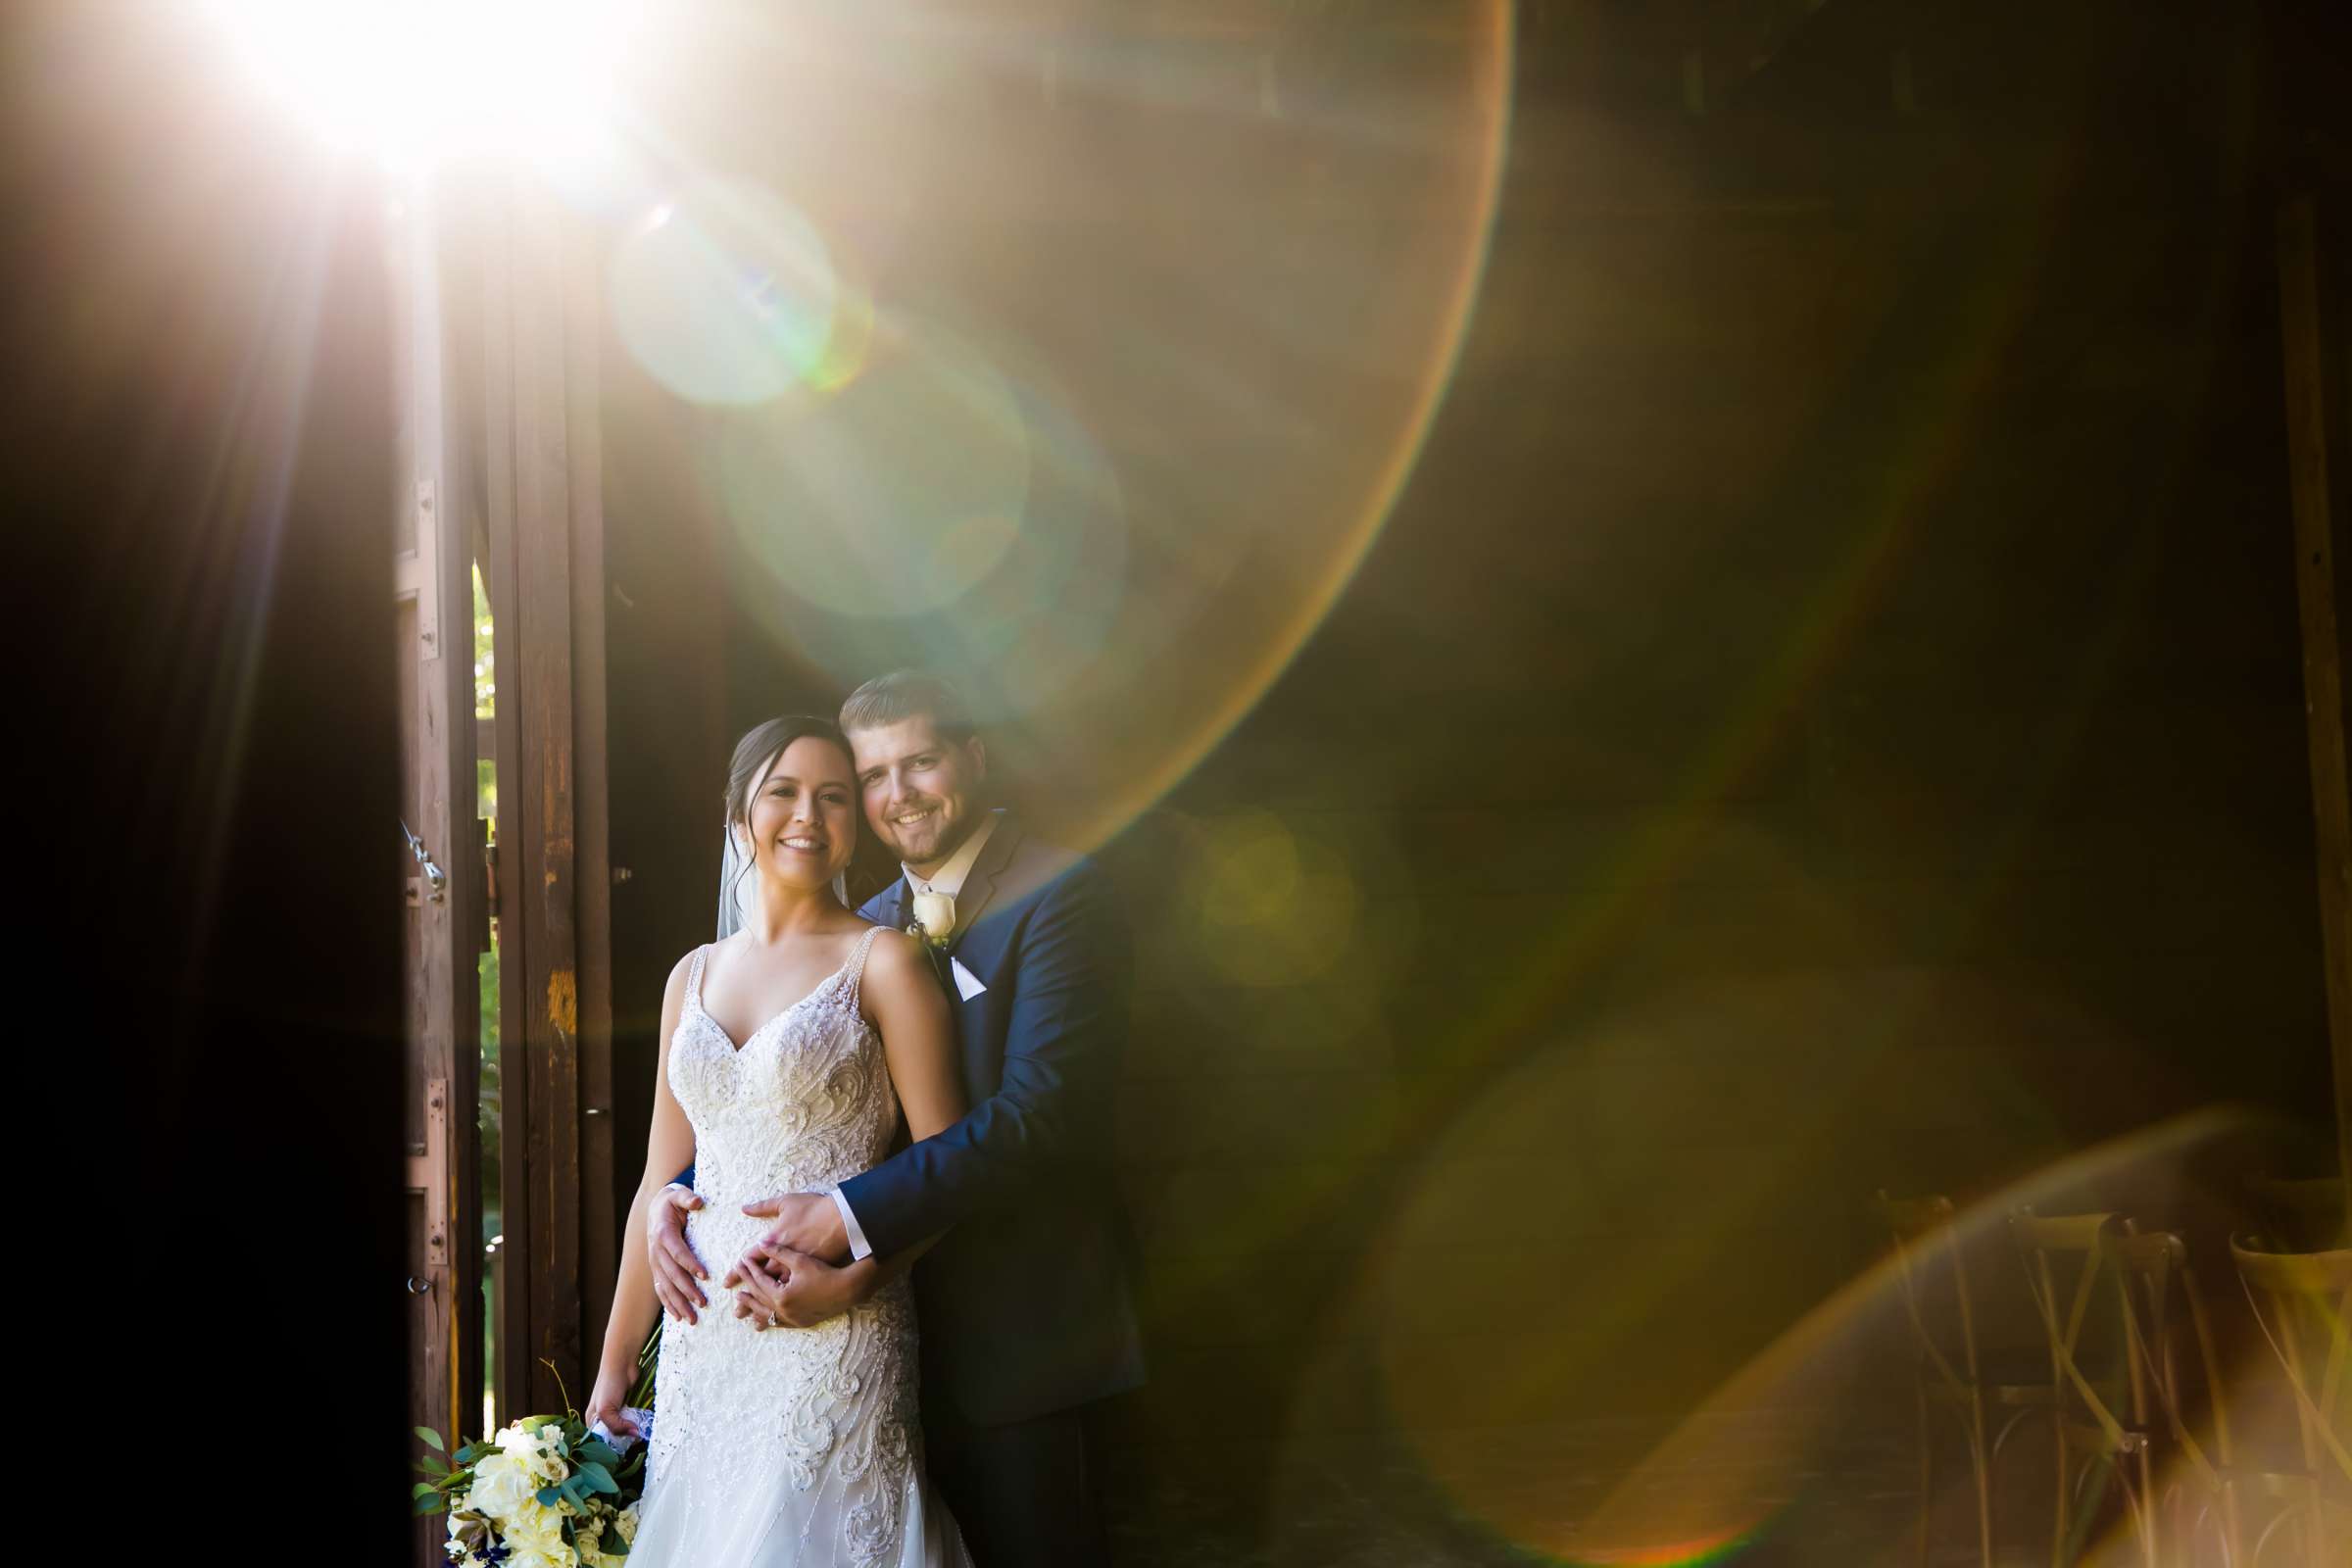 Artsy moment at Ethereal Gardens Wedding, Caitlin and Brake Wedding Photo #7 by True Photography